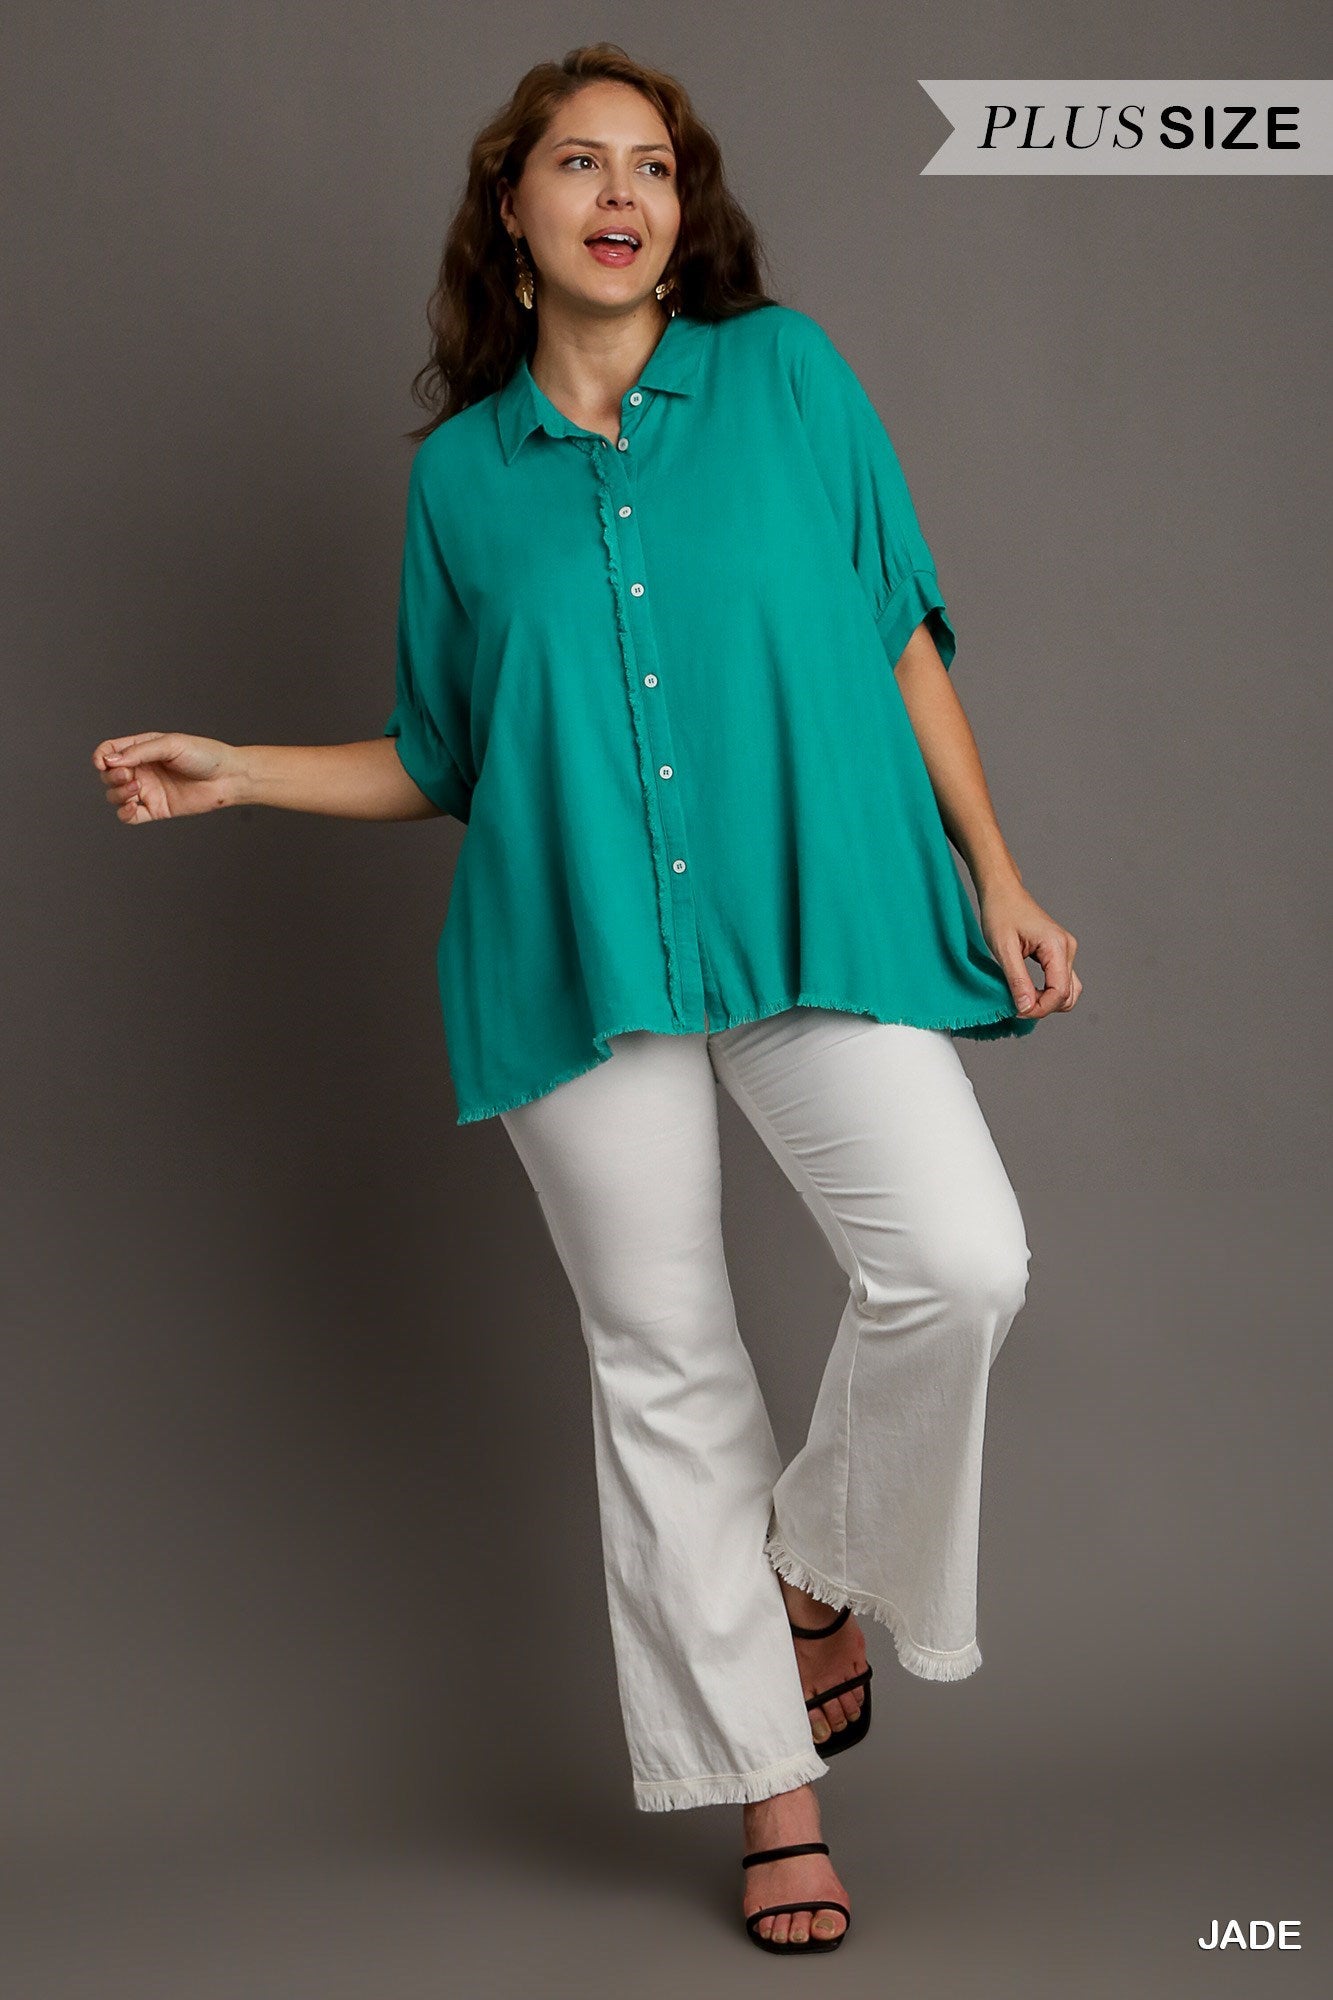 Linen Boxy Cut Top w/ Fray Details